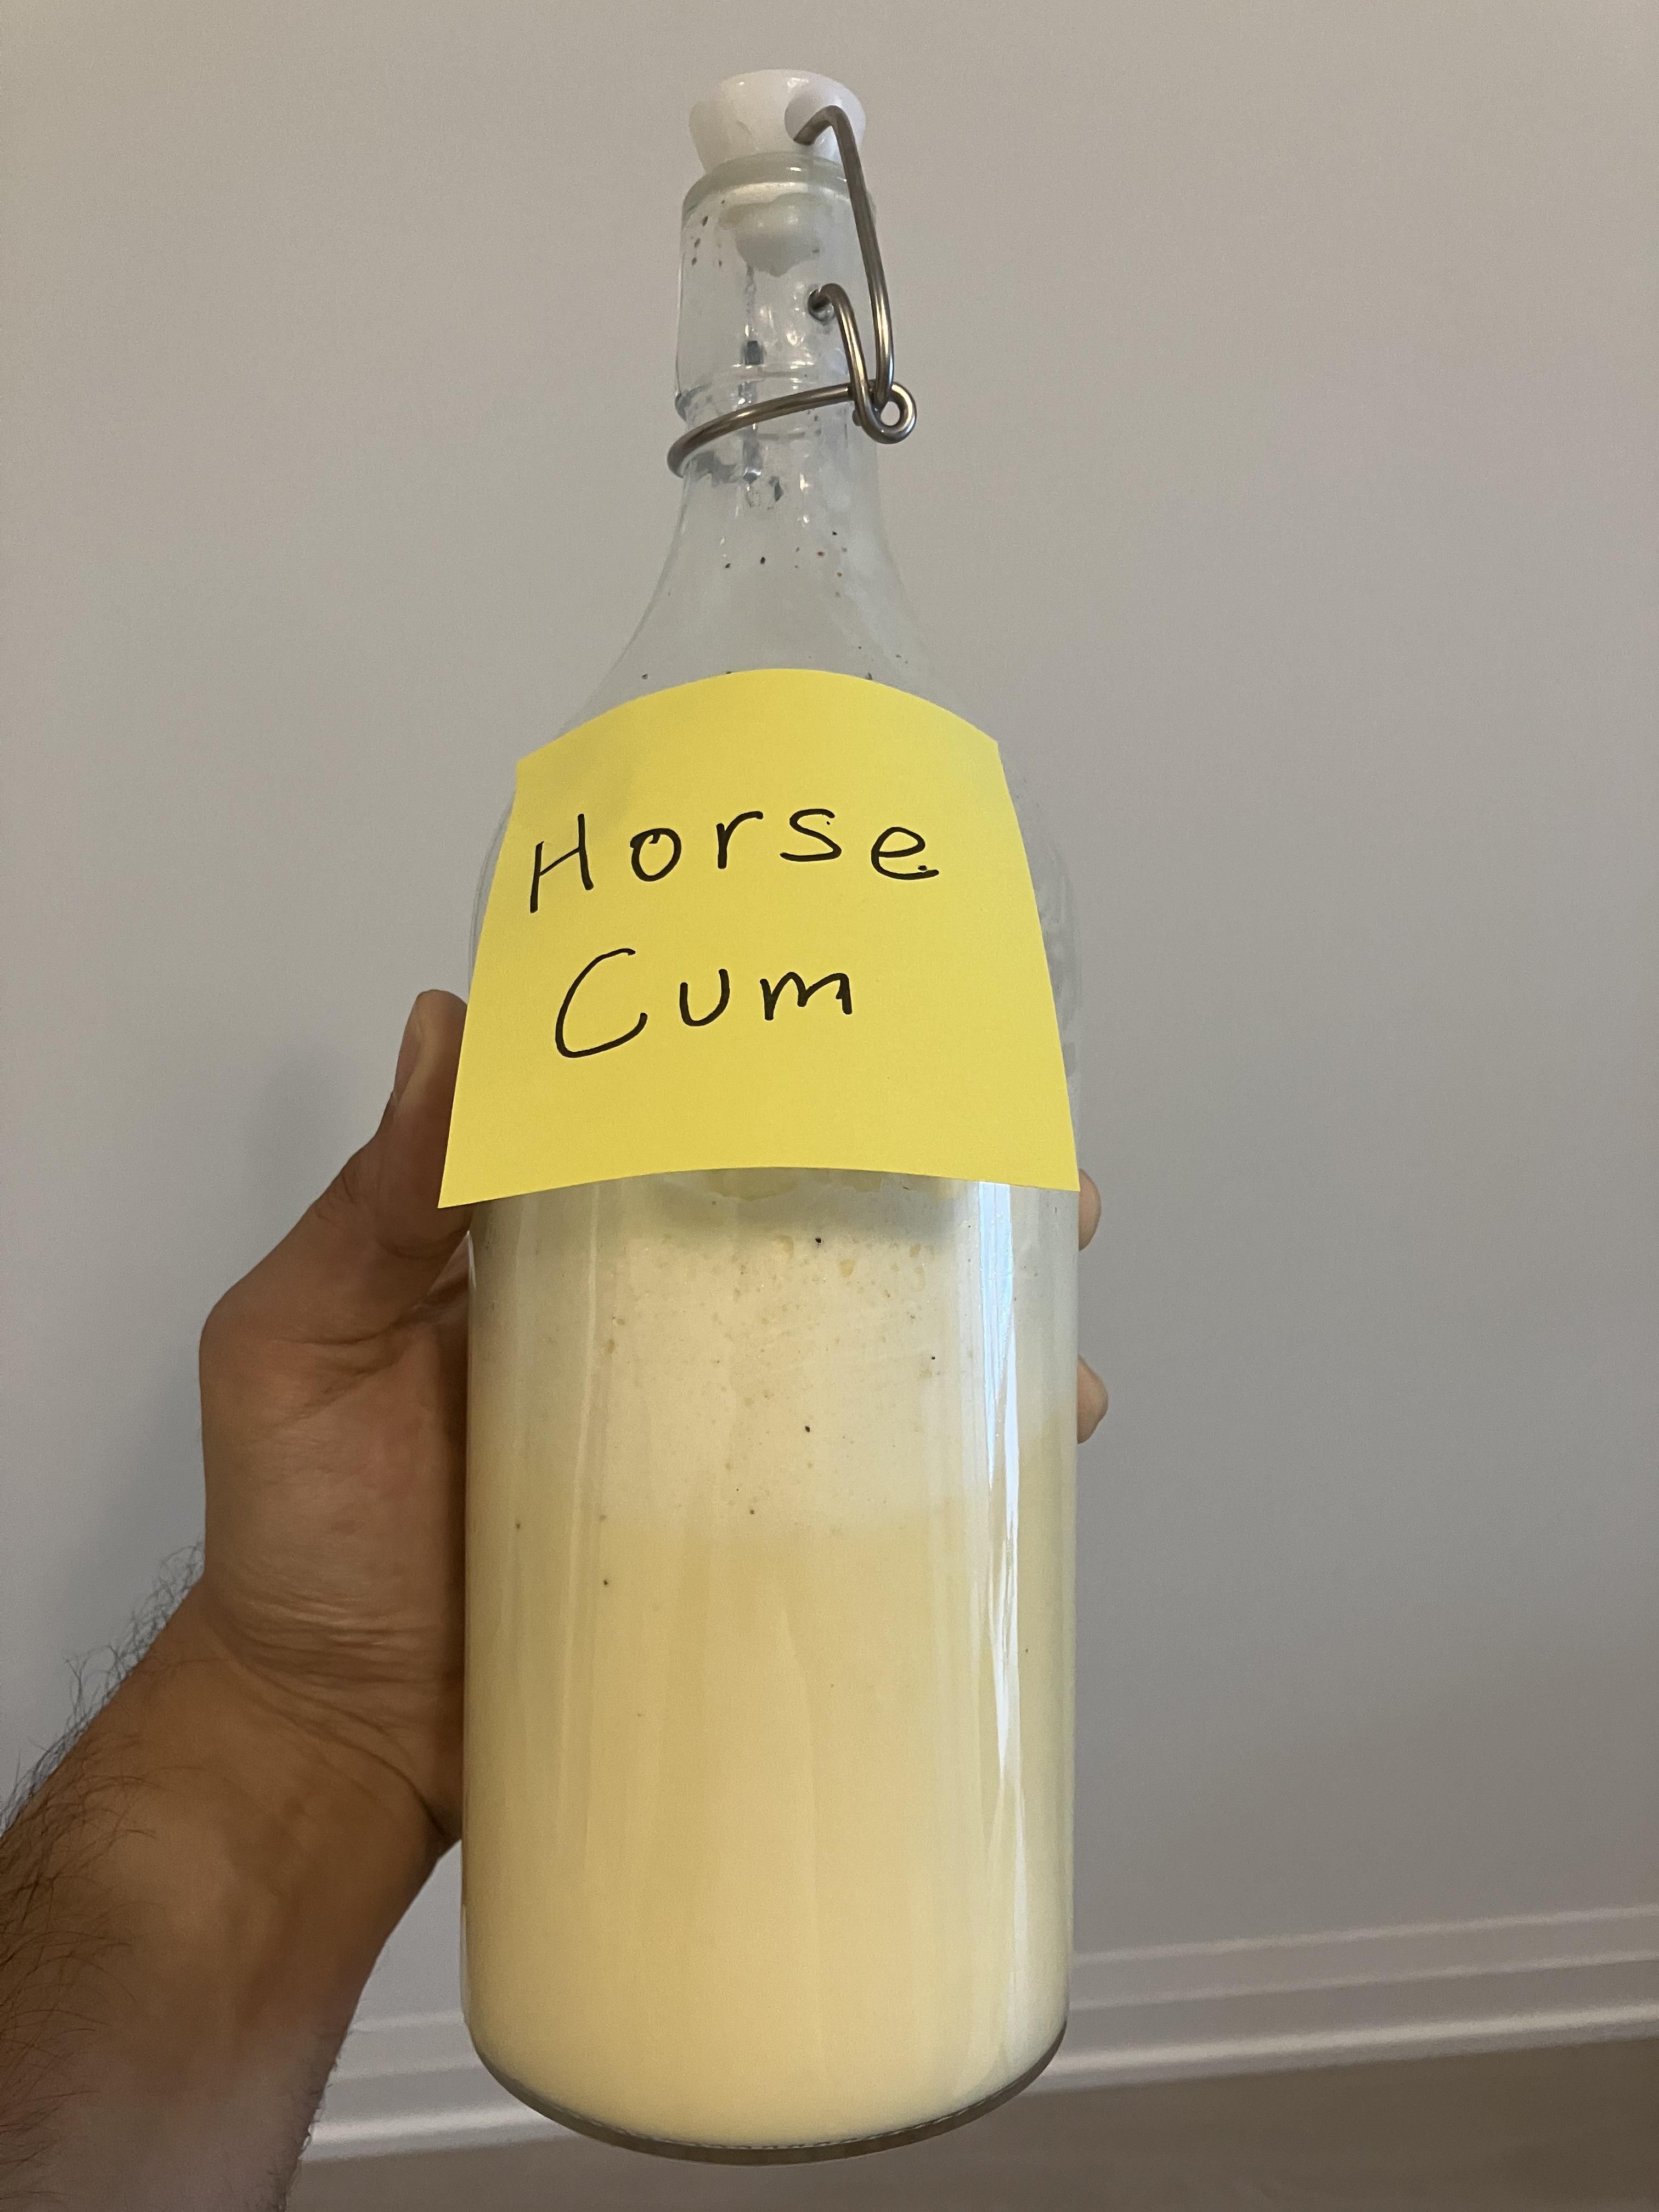 My friend is a veterinarian student and this is how he chooses to label his eggnog.